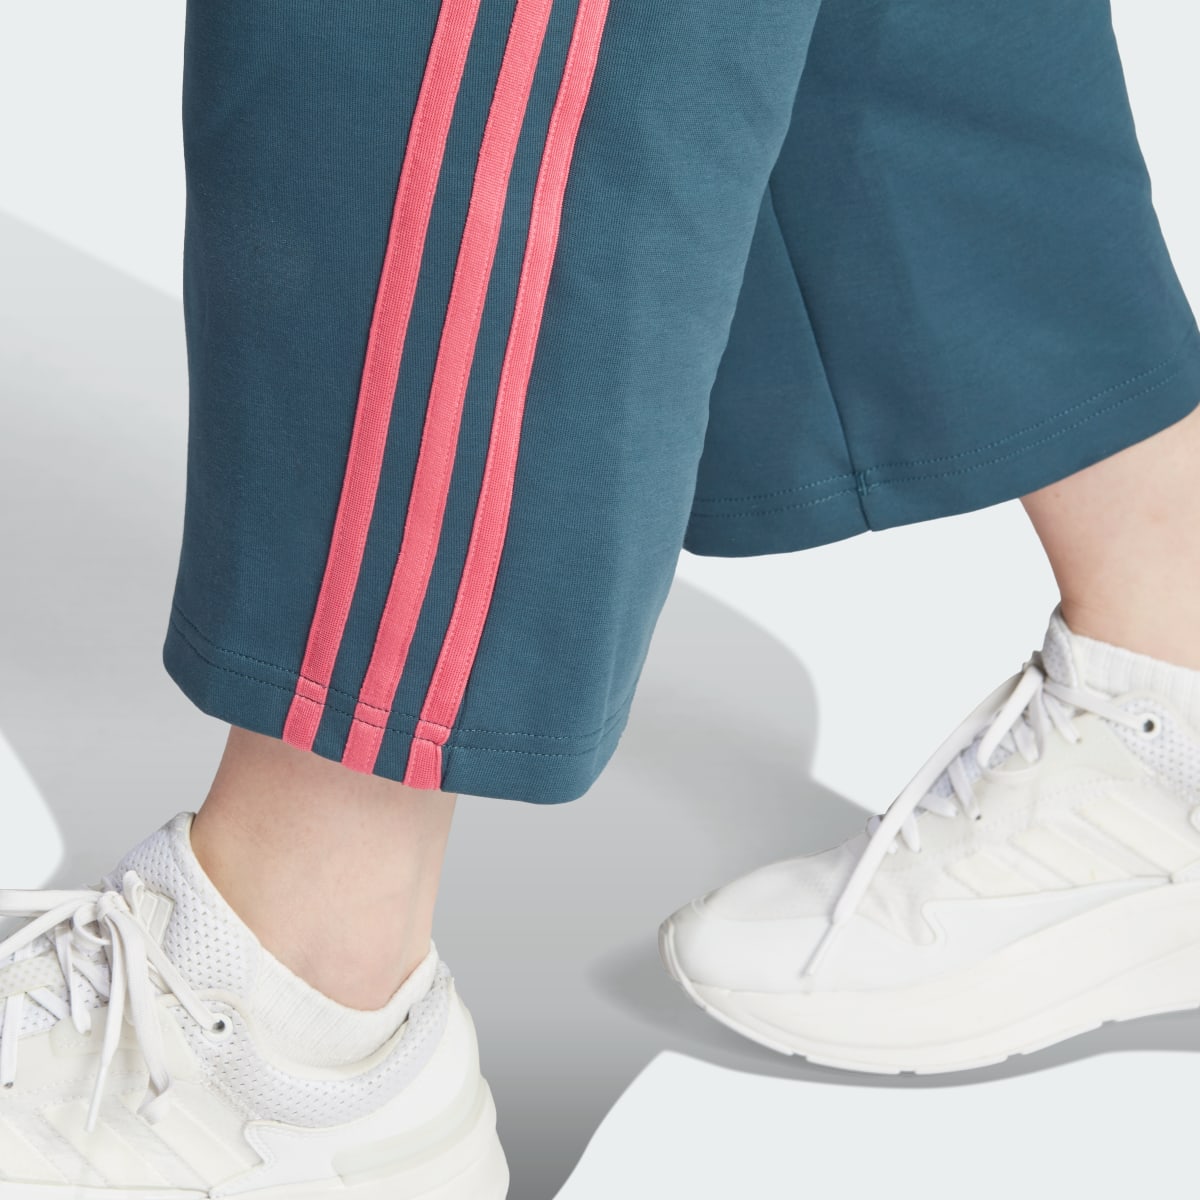 Adidas Future Icons 3-Stripes Tracksuit Bottoms. 5